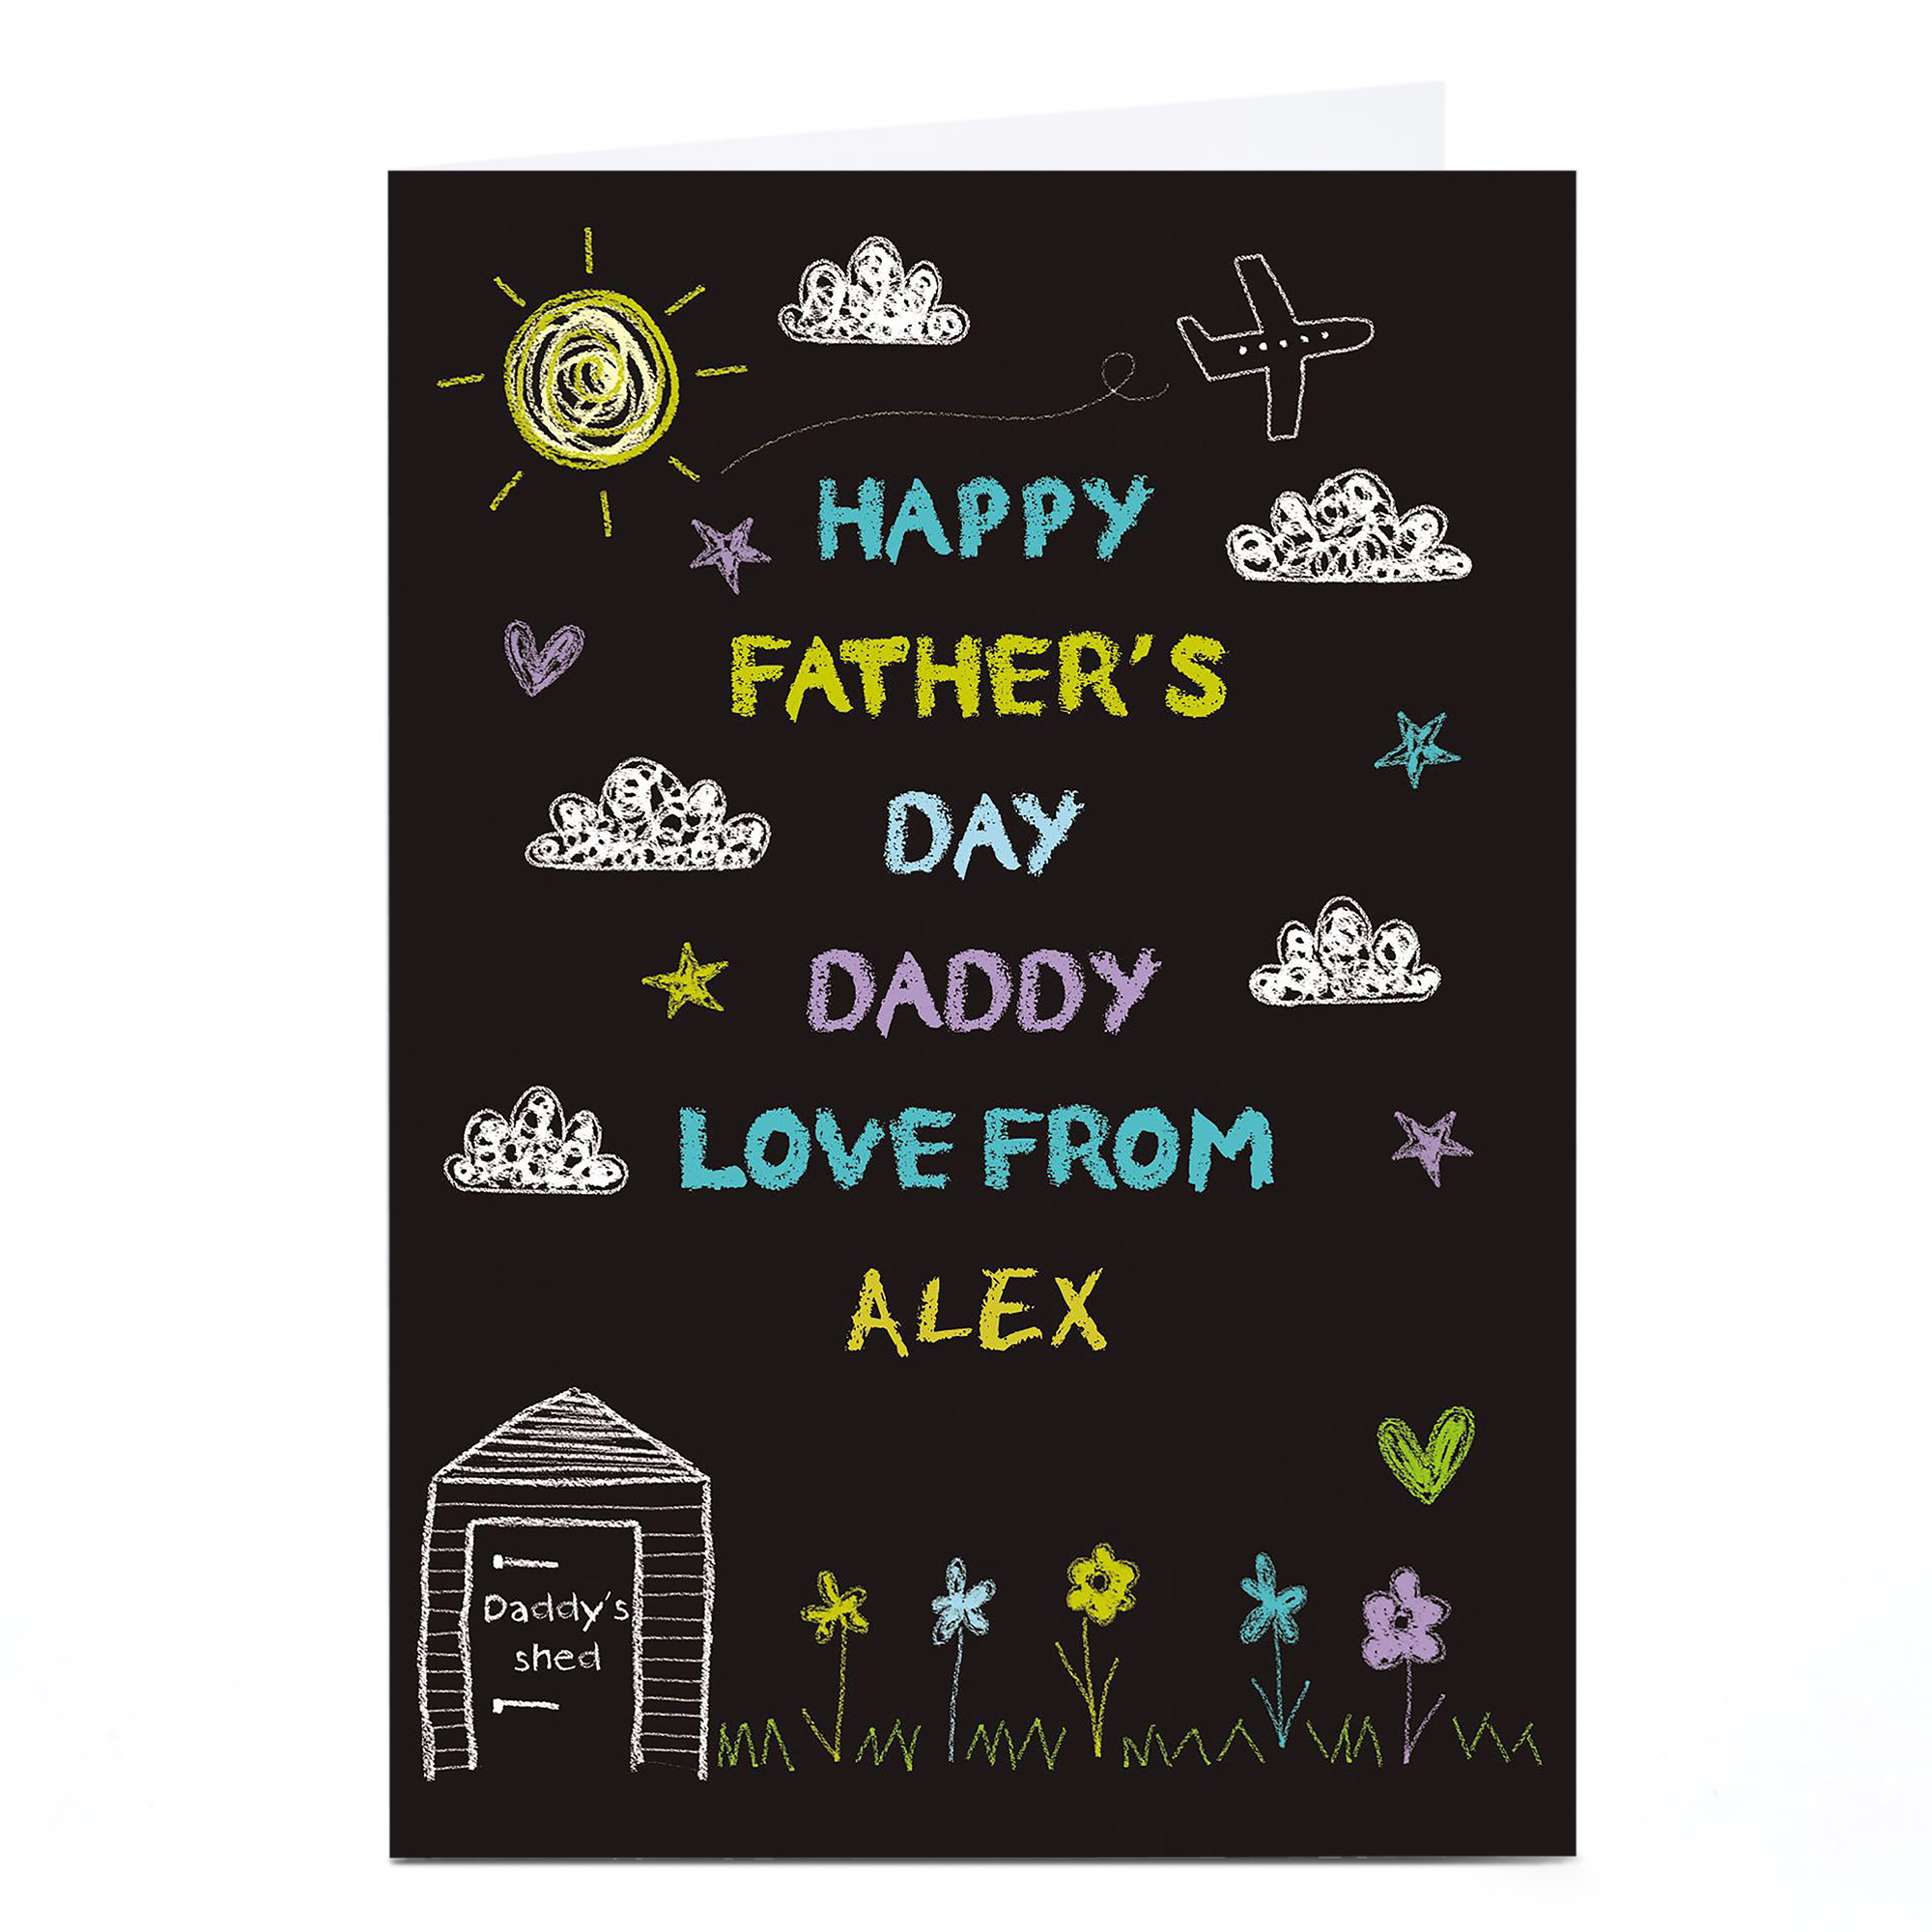 Personalised Card - Happy Father's Day Daddy